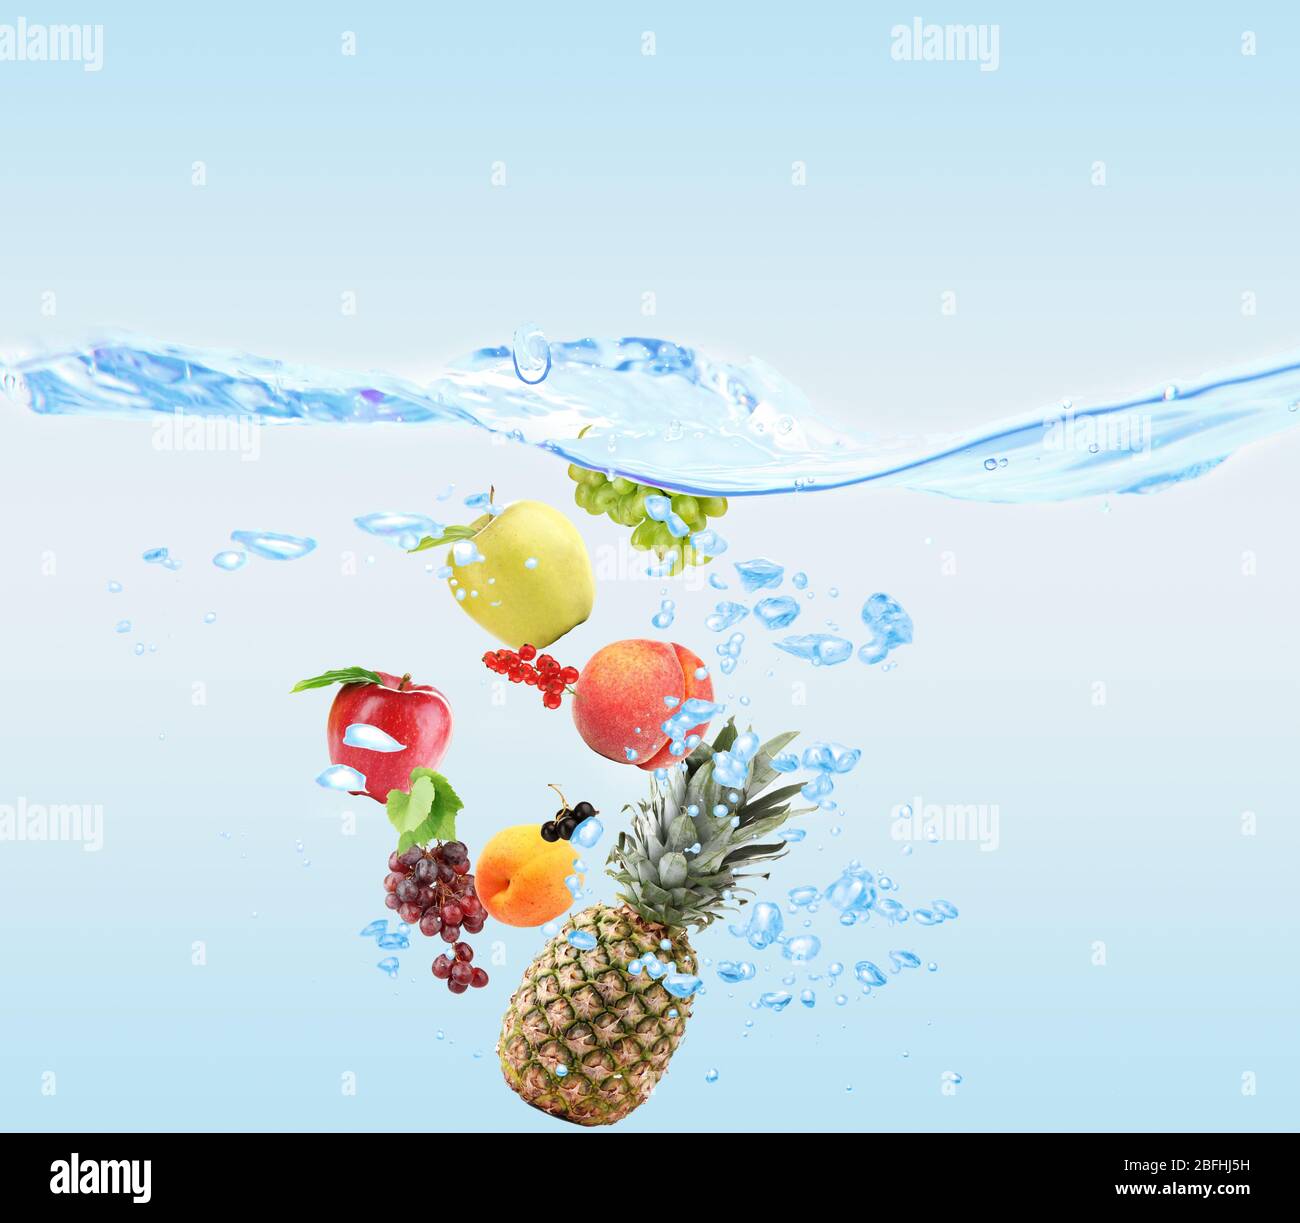 Fresh fruits dropped into water Stock Photo